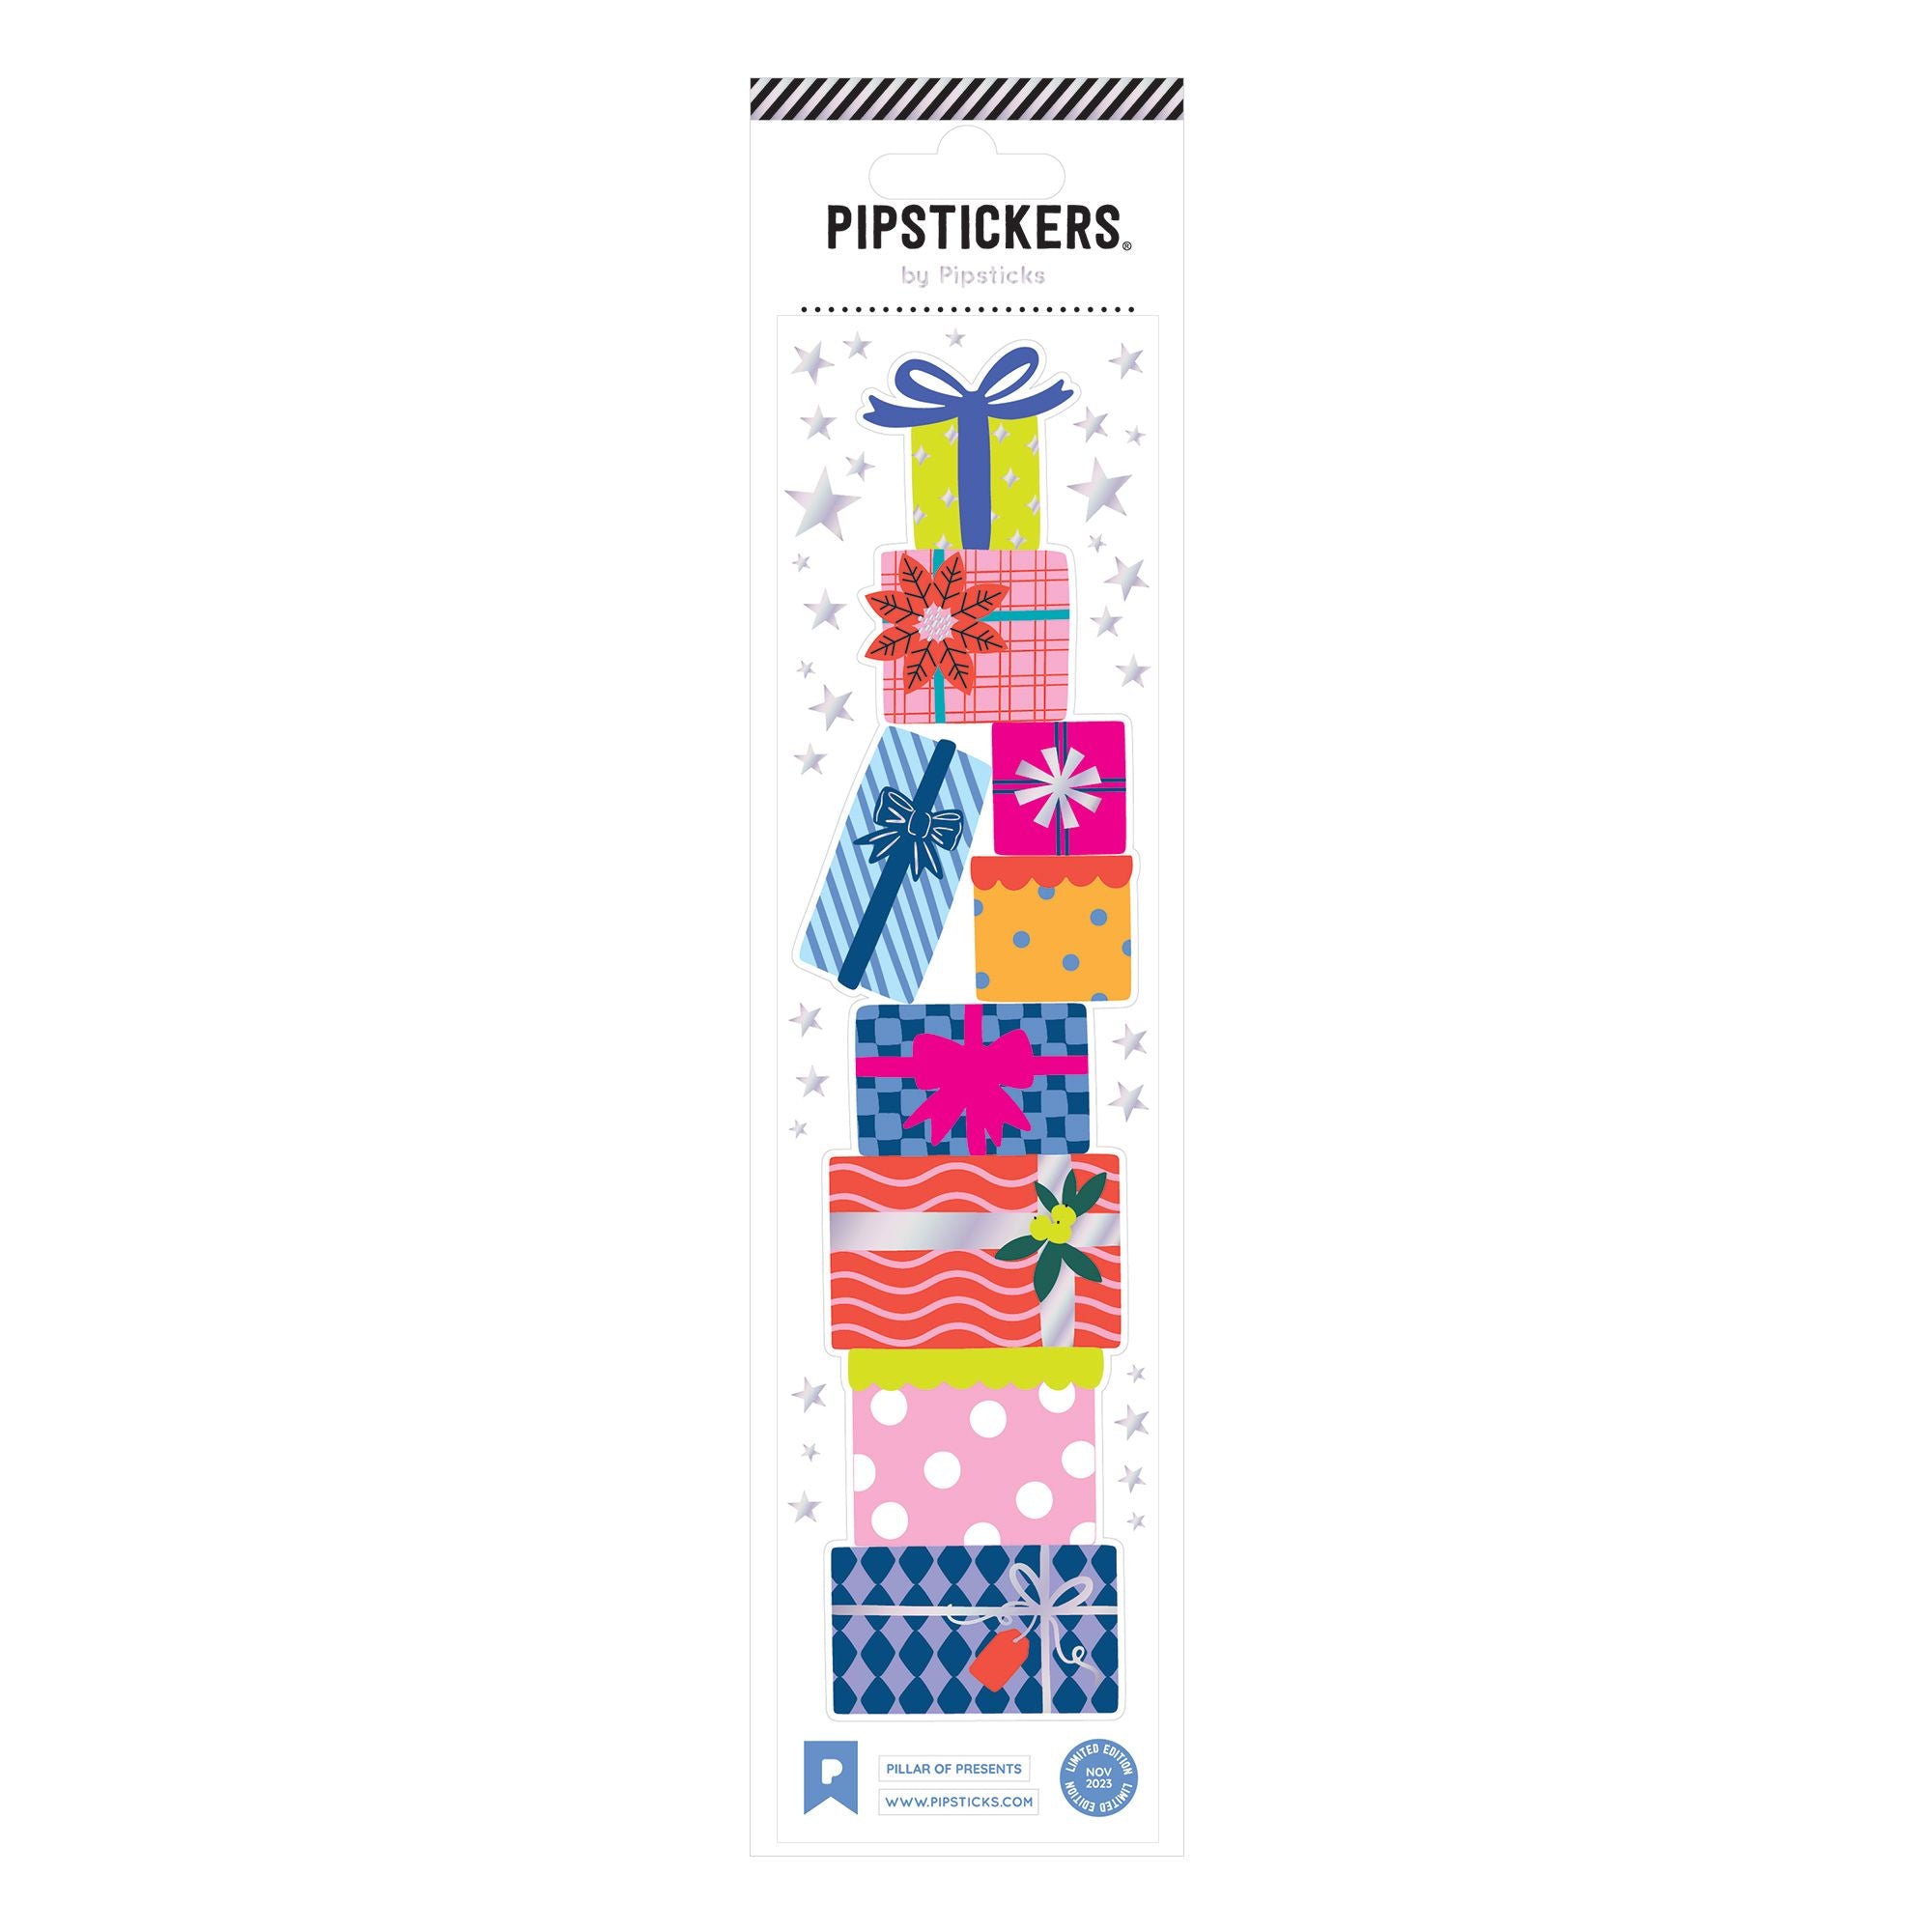 Pipsticks - Squeaky Clean Stickers - 852406904617